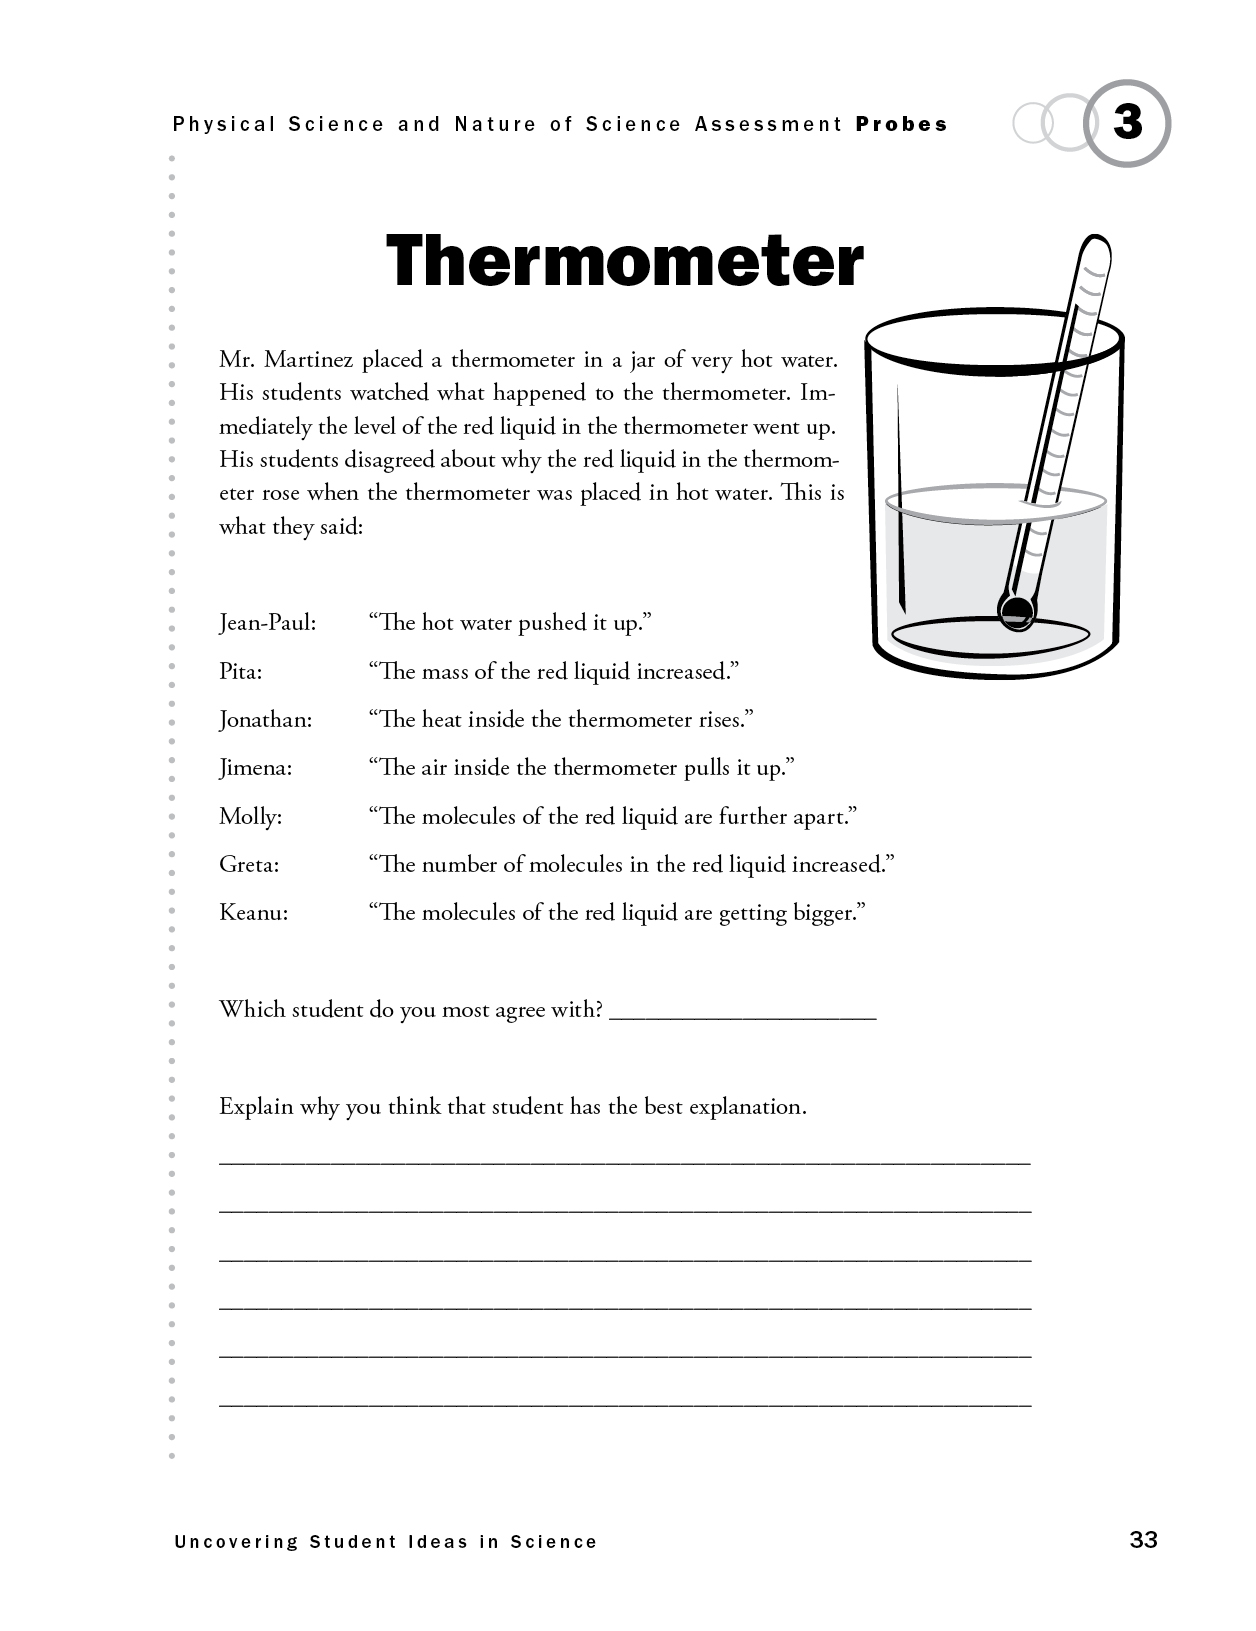 What Liquid Is Inside a Thermometer?